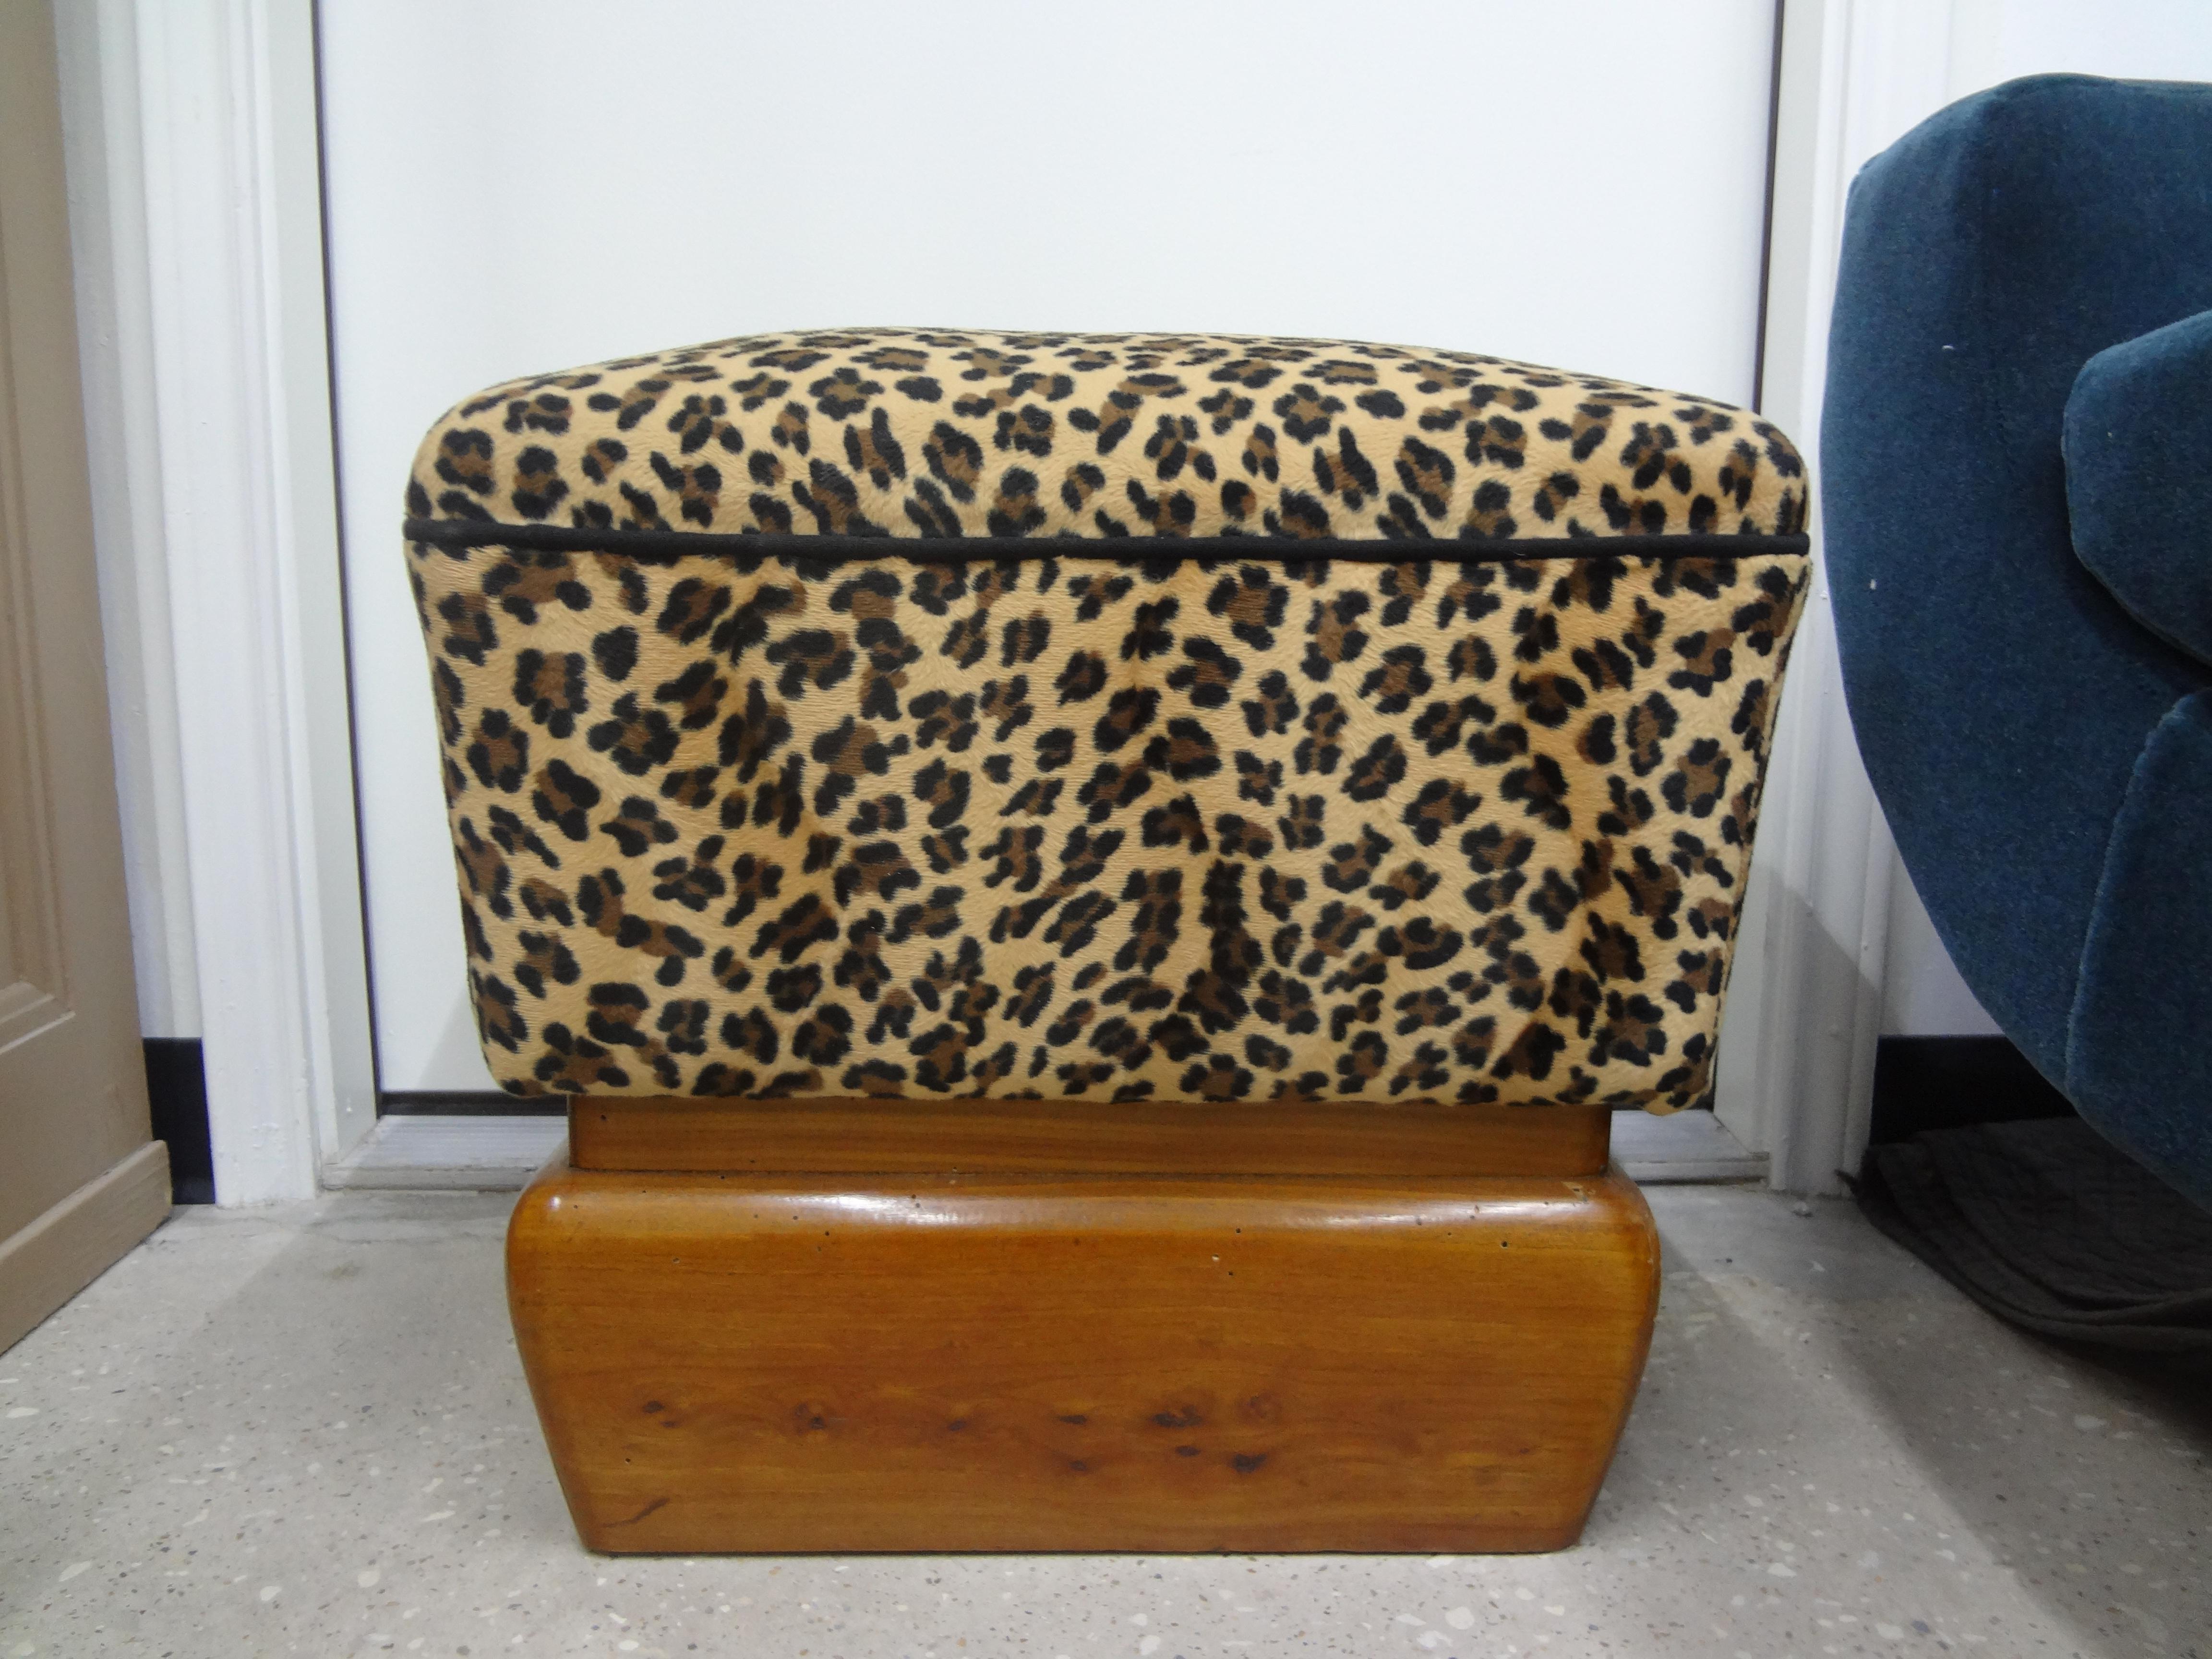 Italian Art Deco Ottoman Or Bench.
This handsome Italian Art Deco Bench has a plinth base and is currently upholstered in leopard print fabric.
Easy to reupholster if needed.